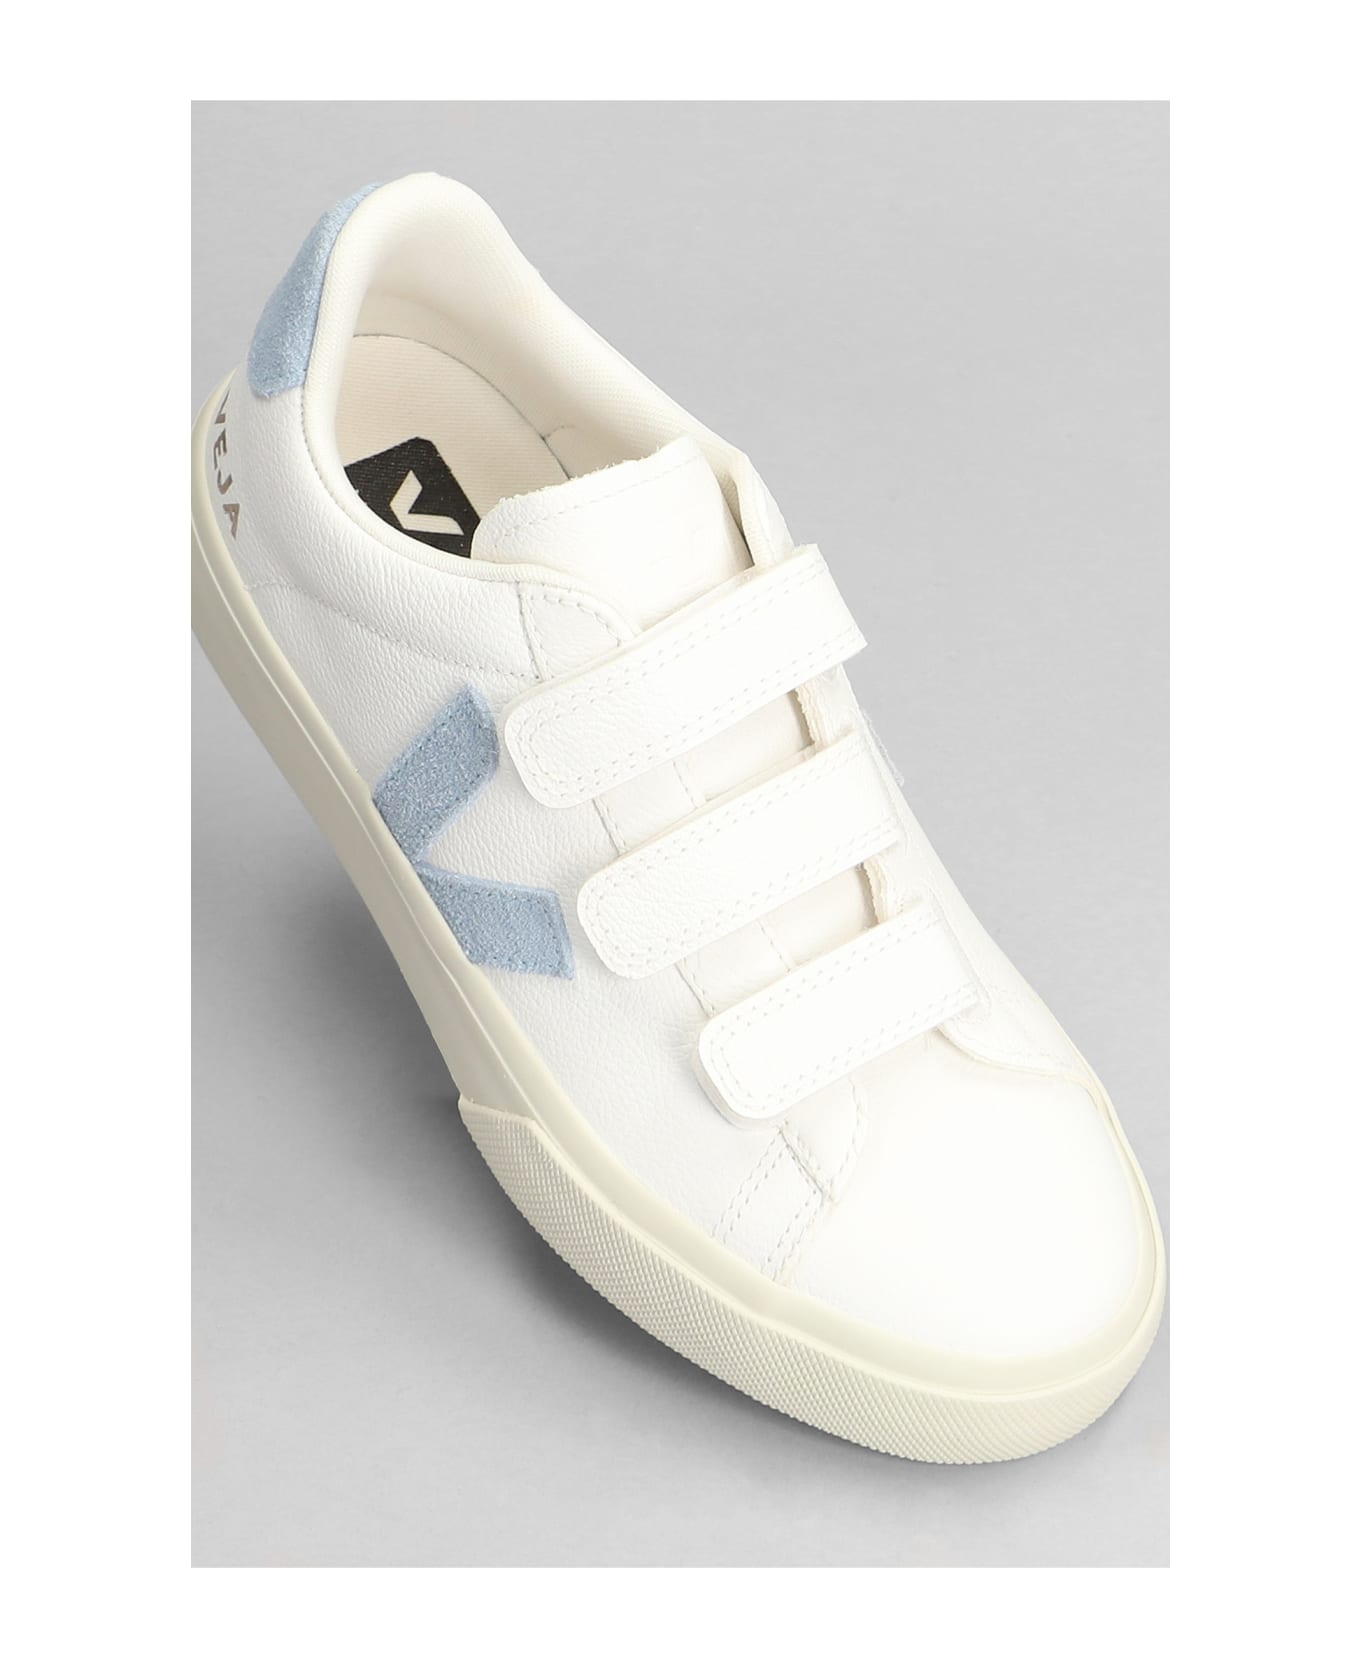 Veja Recife Sneakers In White Leather - white